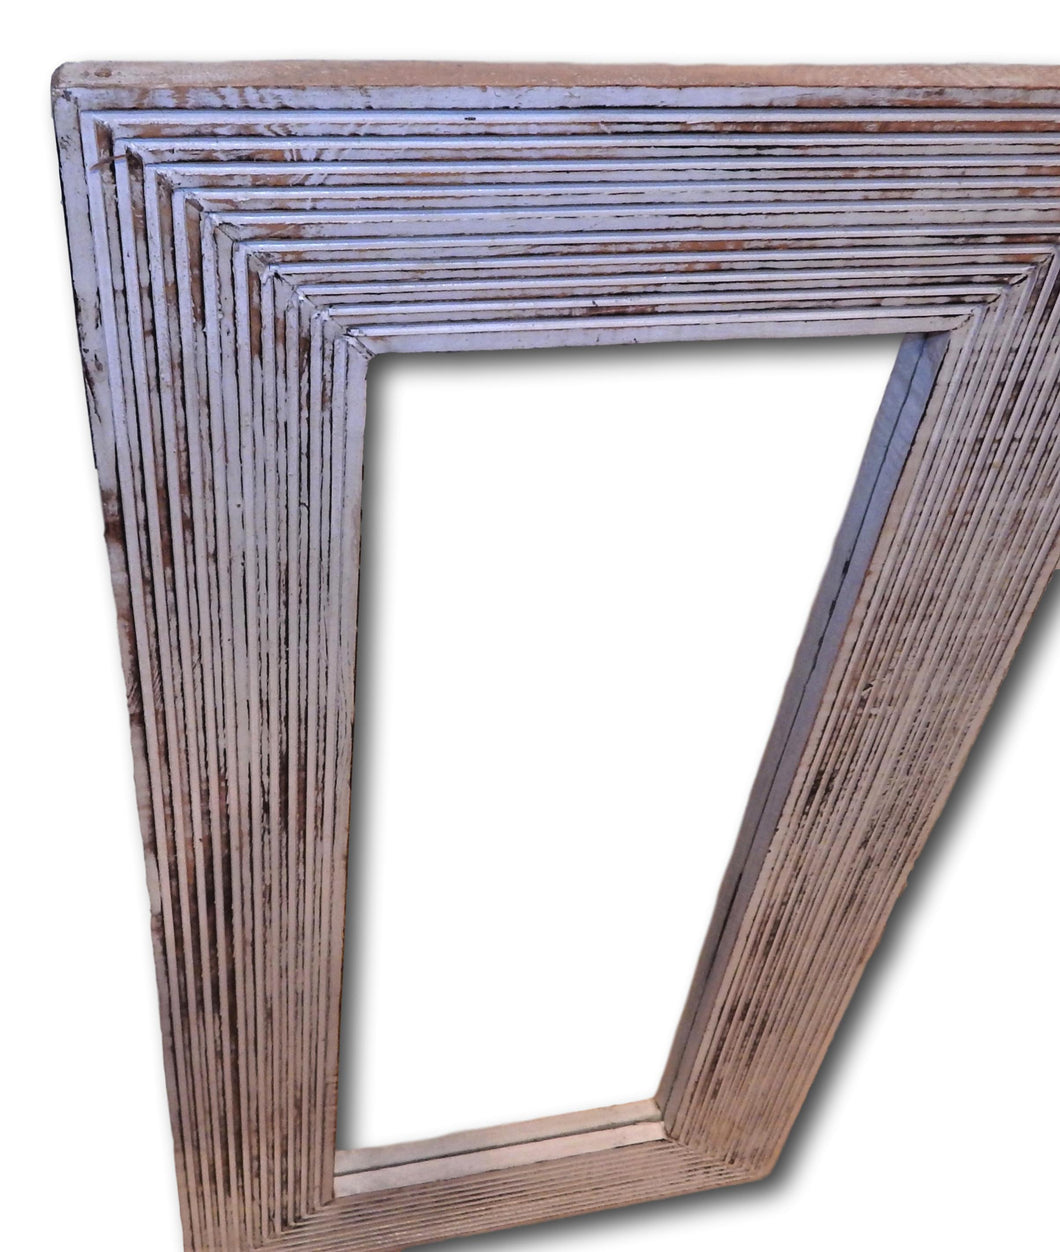 Wall mirror in frame handcrafted from reclaimed wood